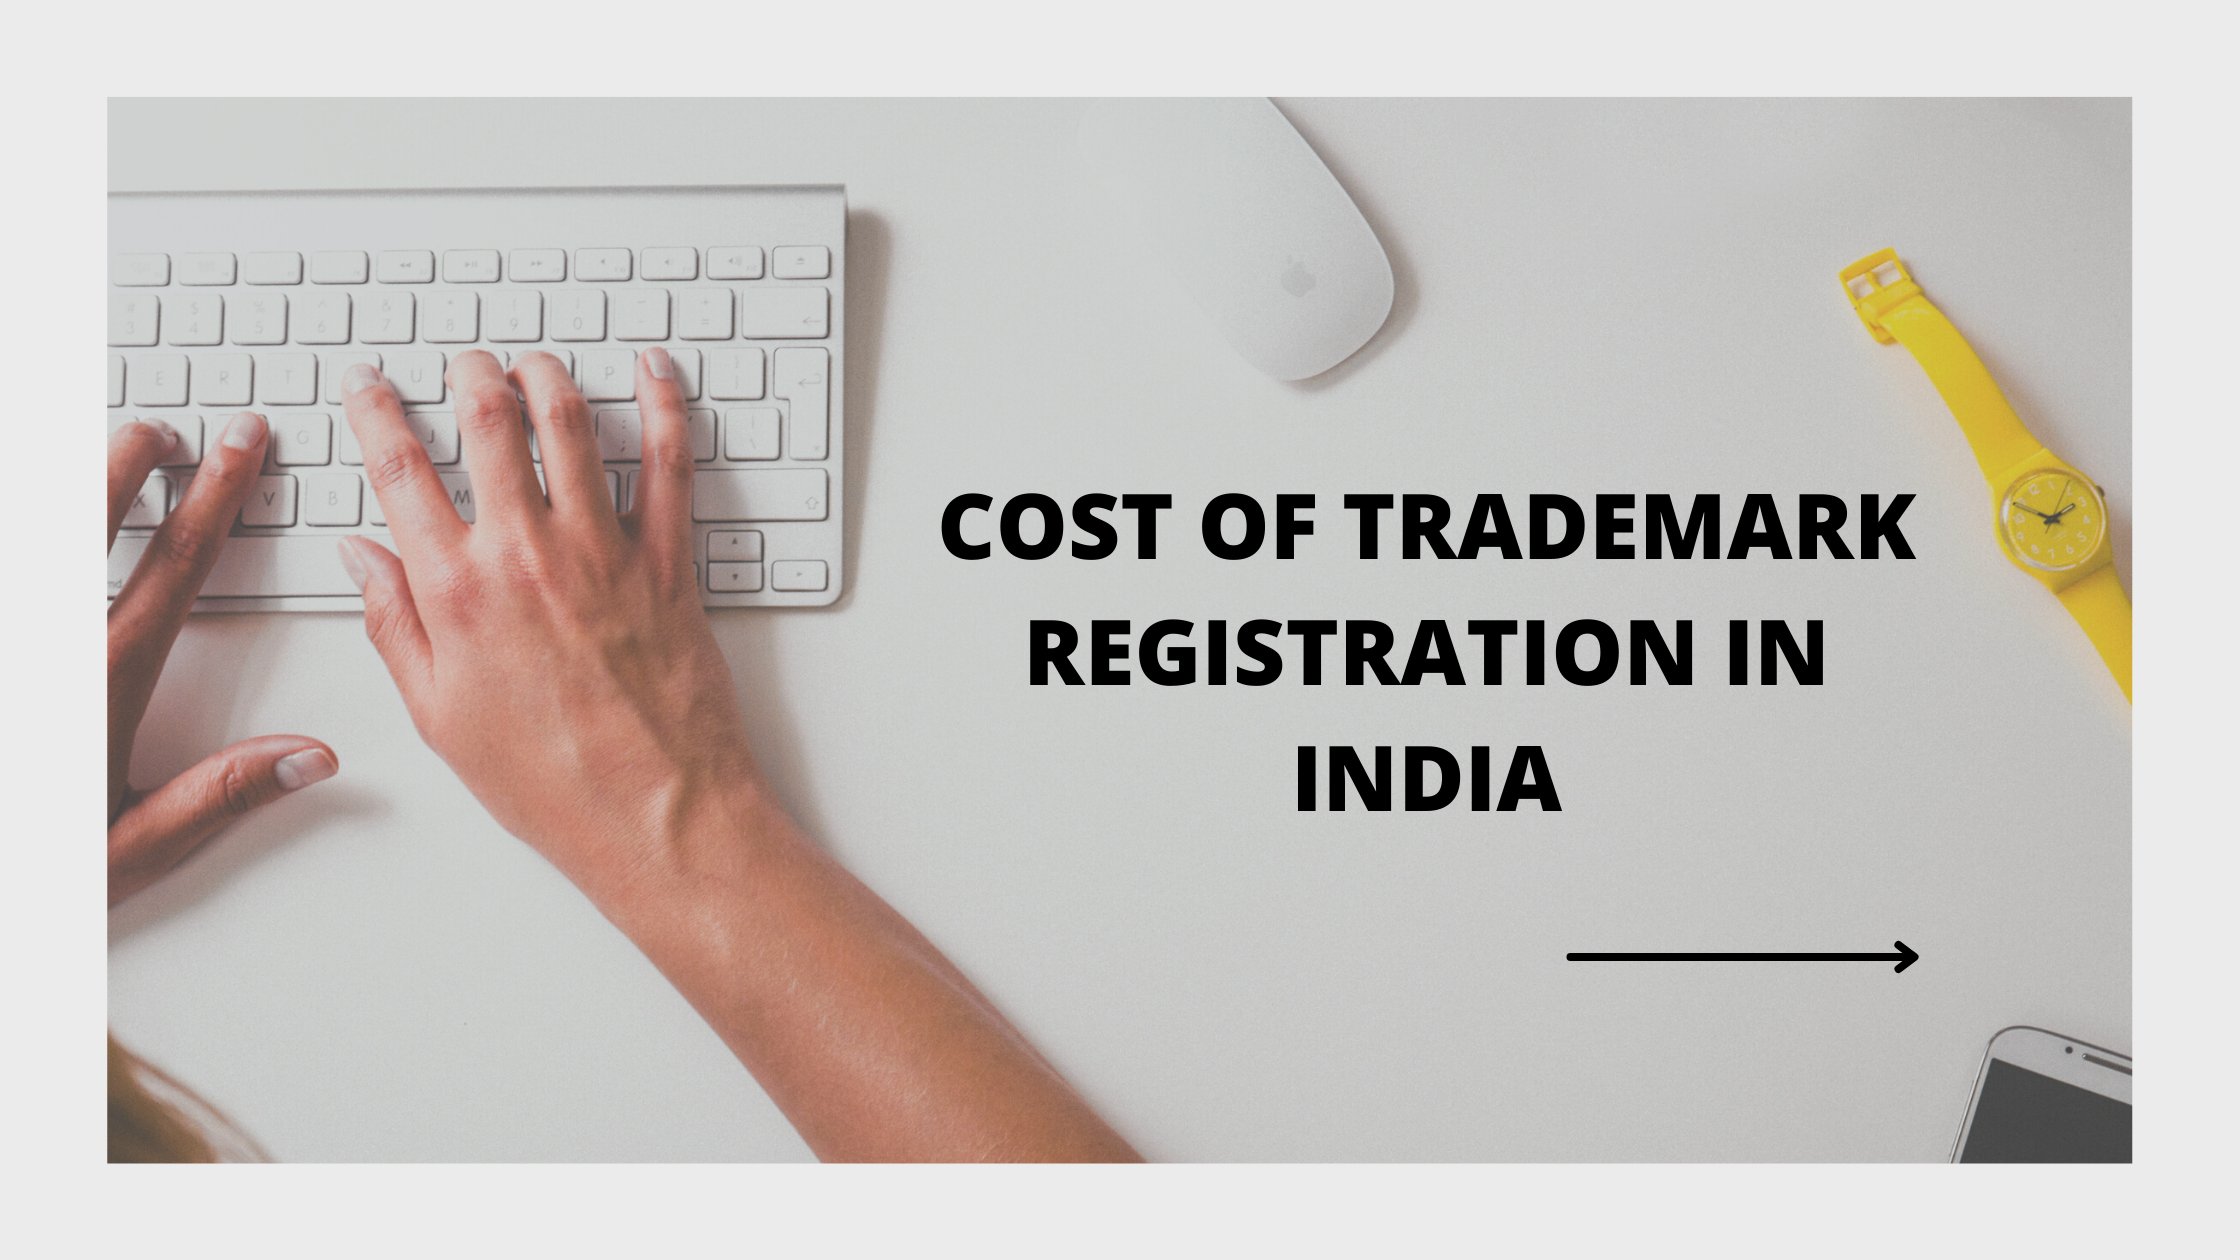 COST OF TRADEMARK REGISTRATION IN INDIA.